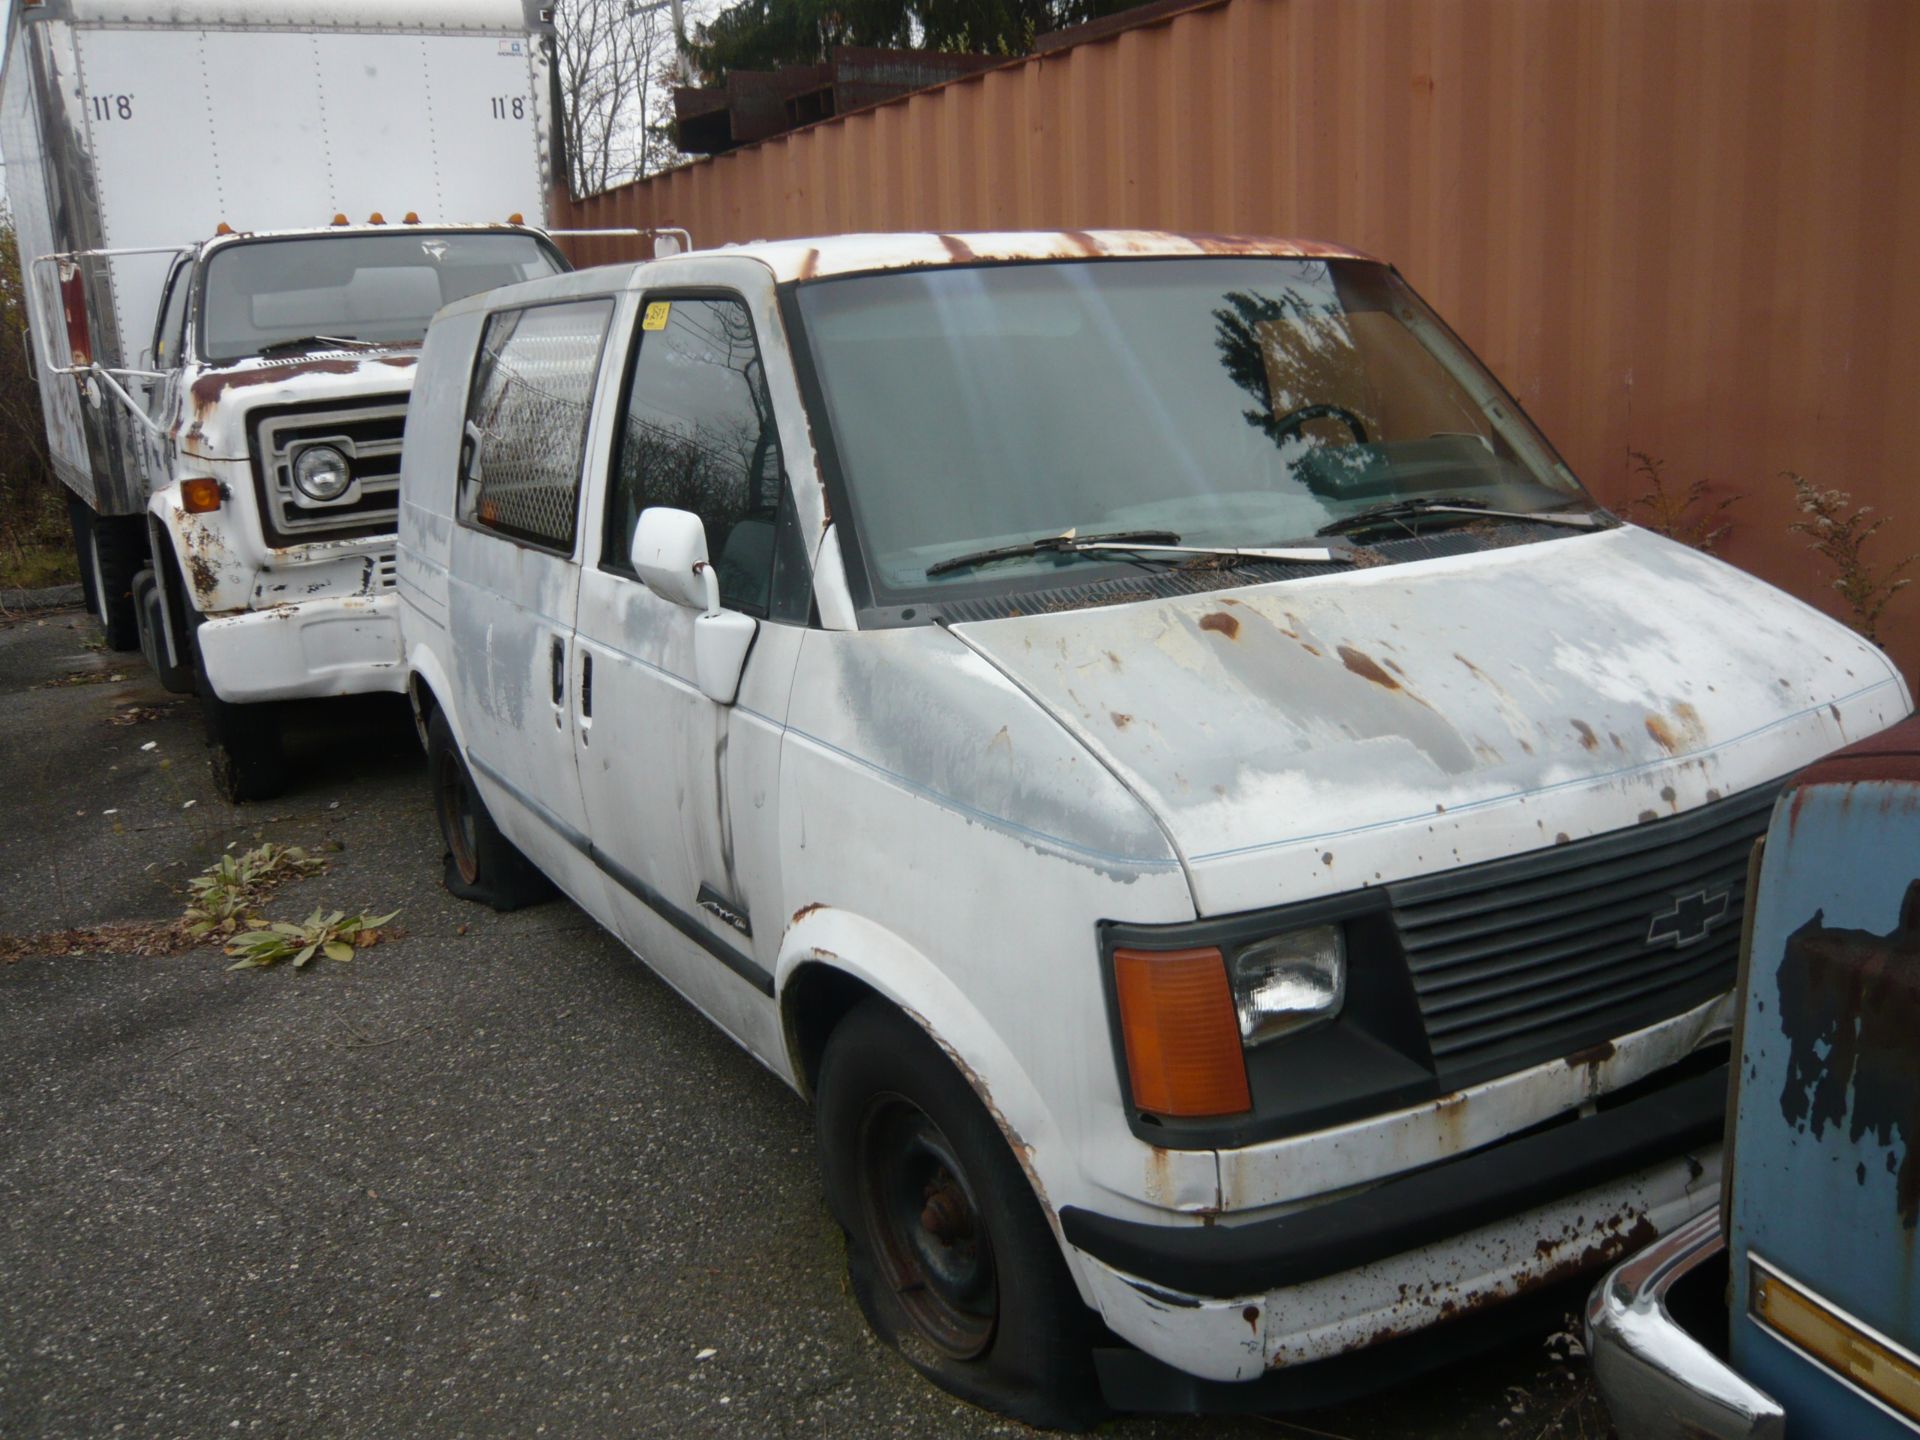 CHEVY ASTRO VAN, AS IS, NO TITLE